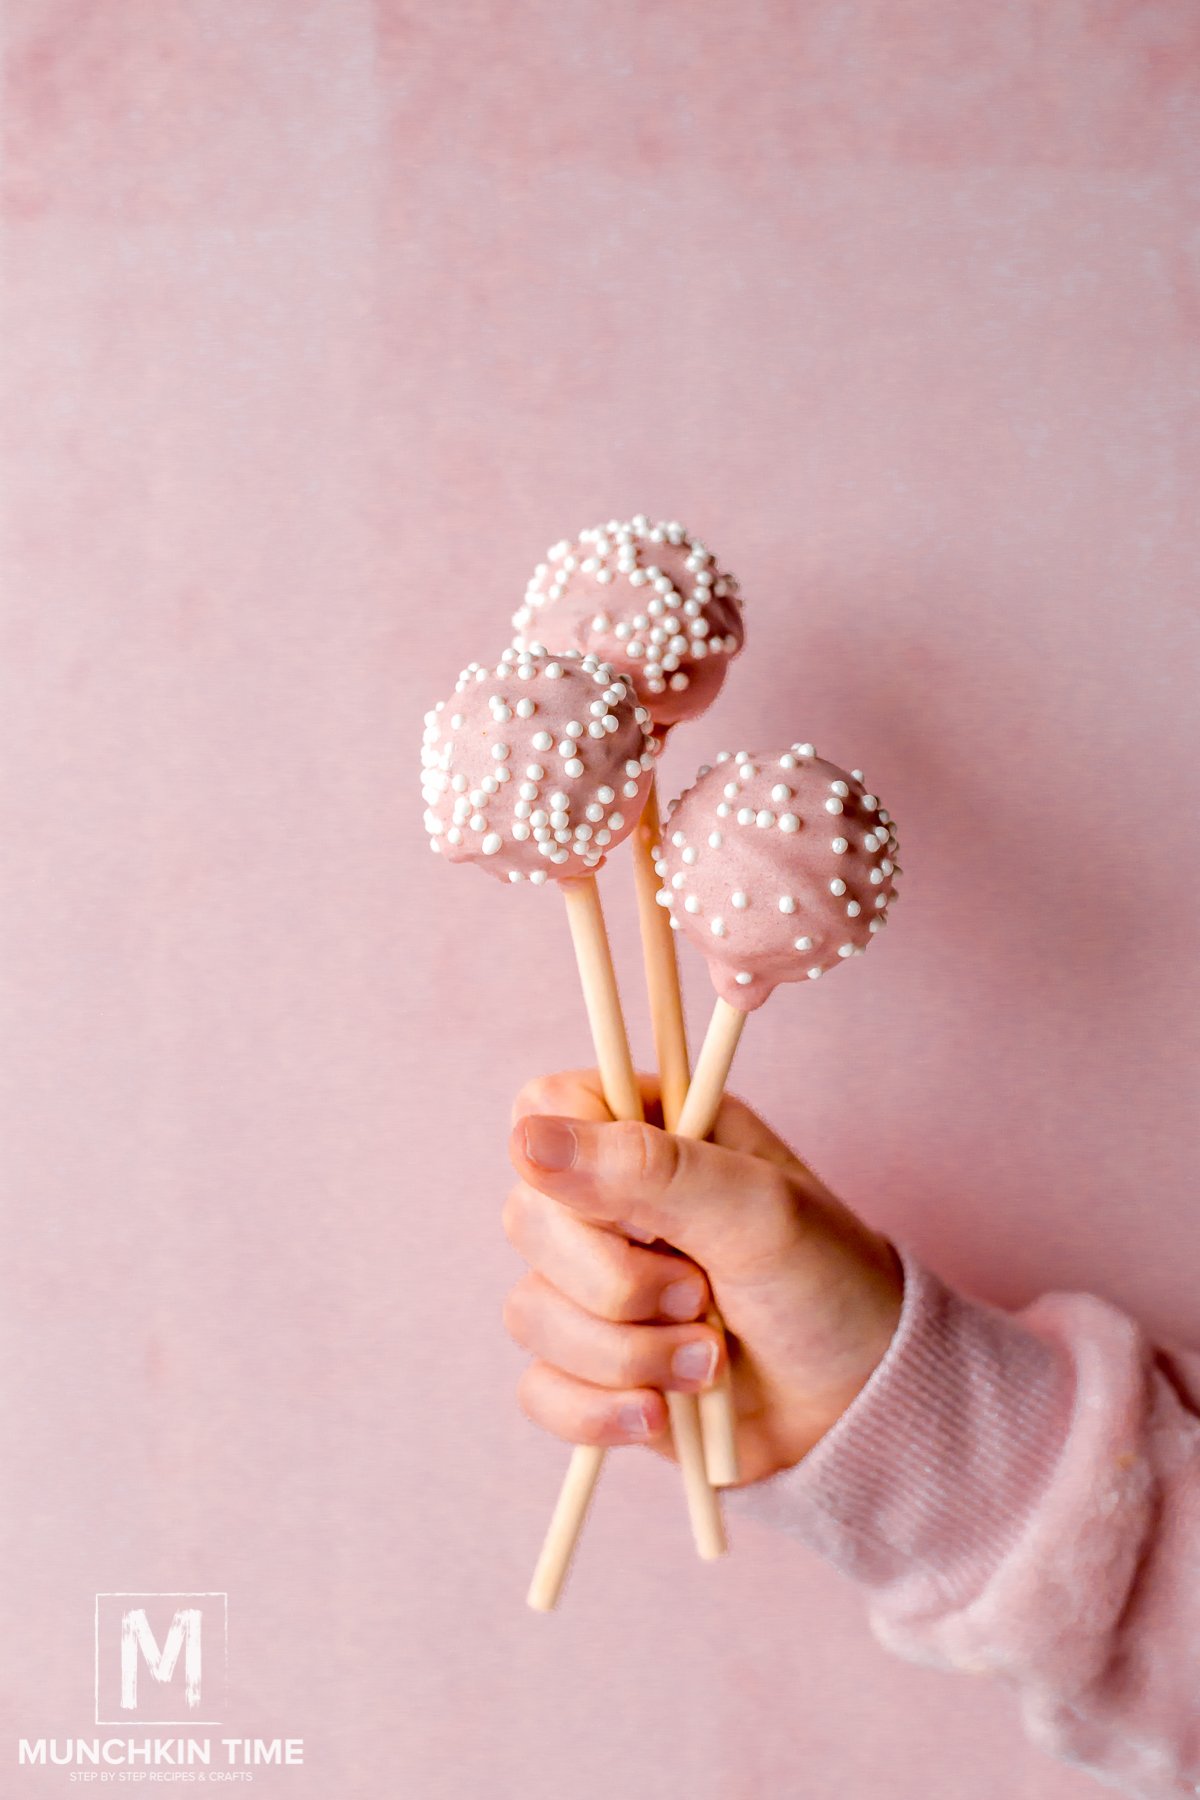 How to Make Cake Pops with a Cake Pop Maker - In the Kitch